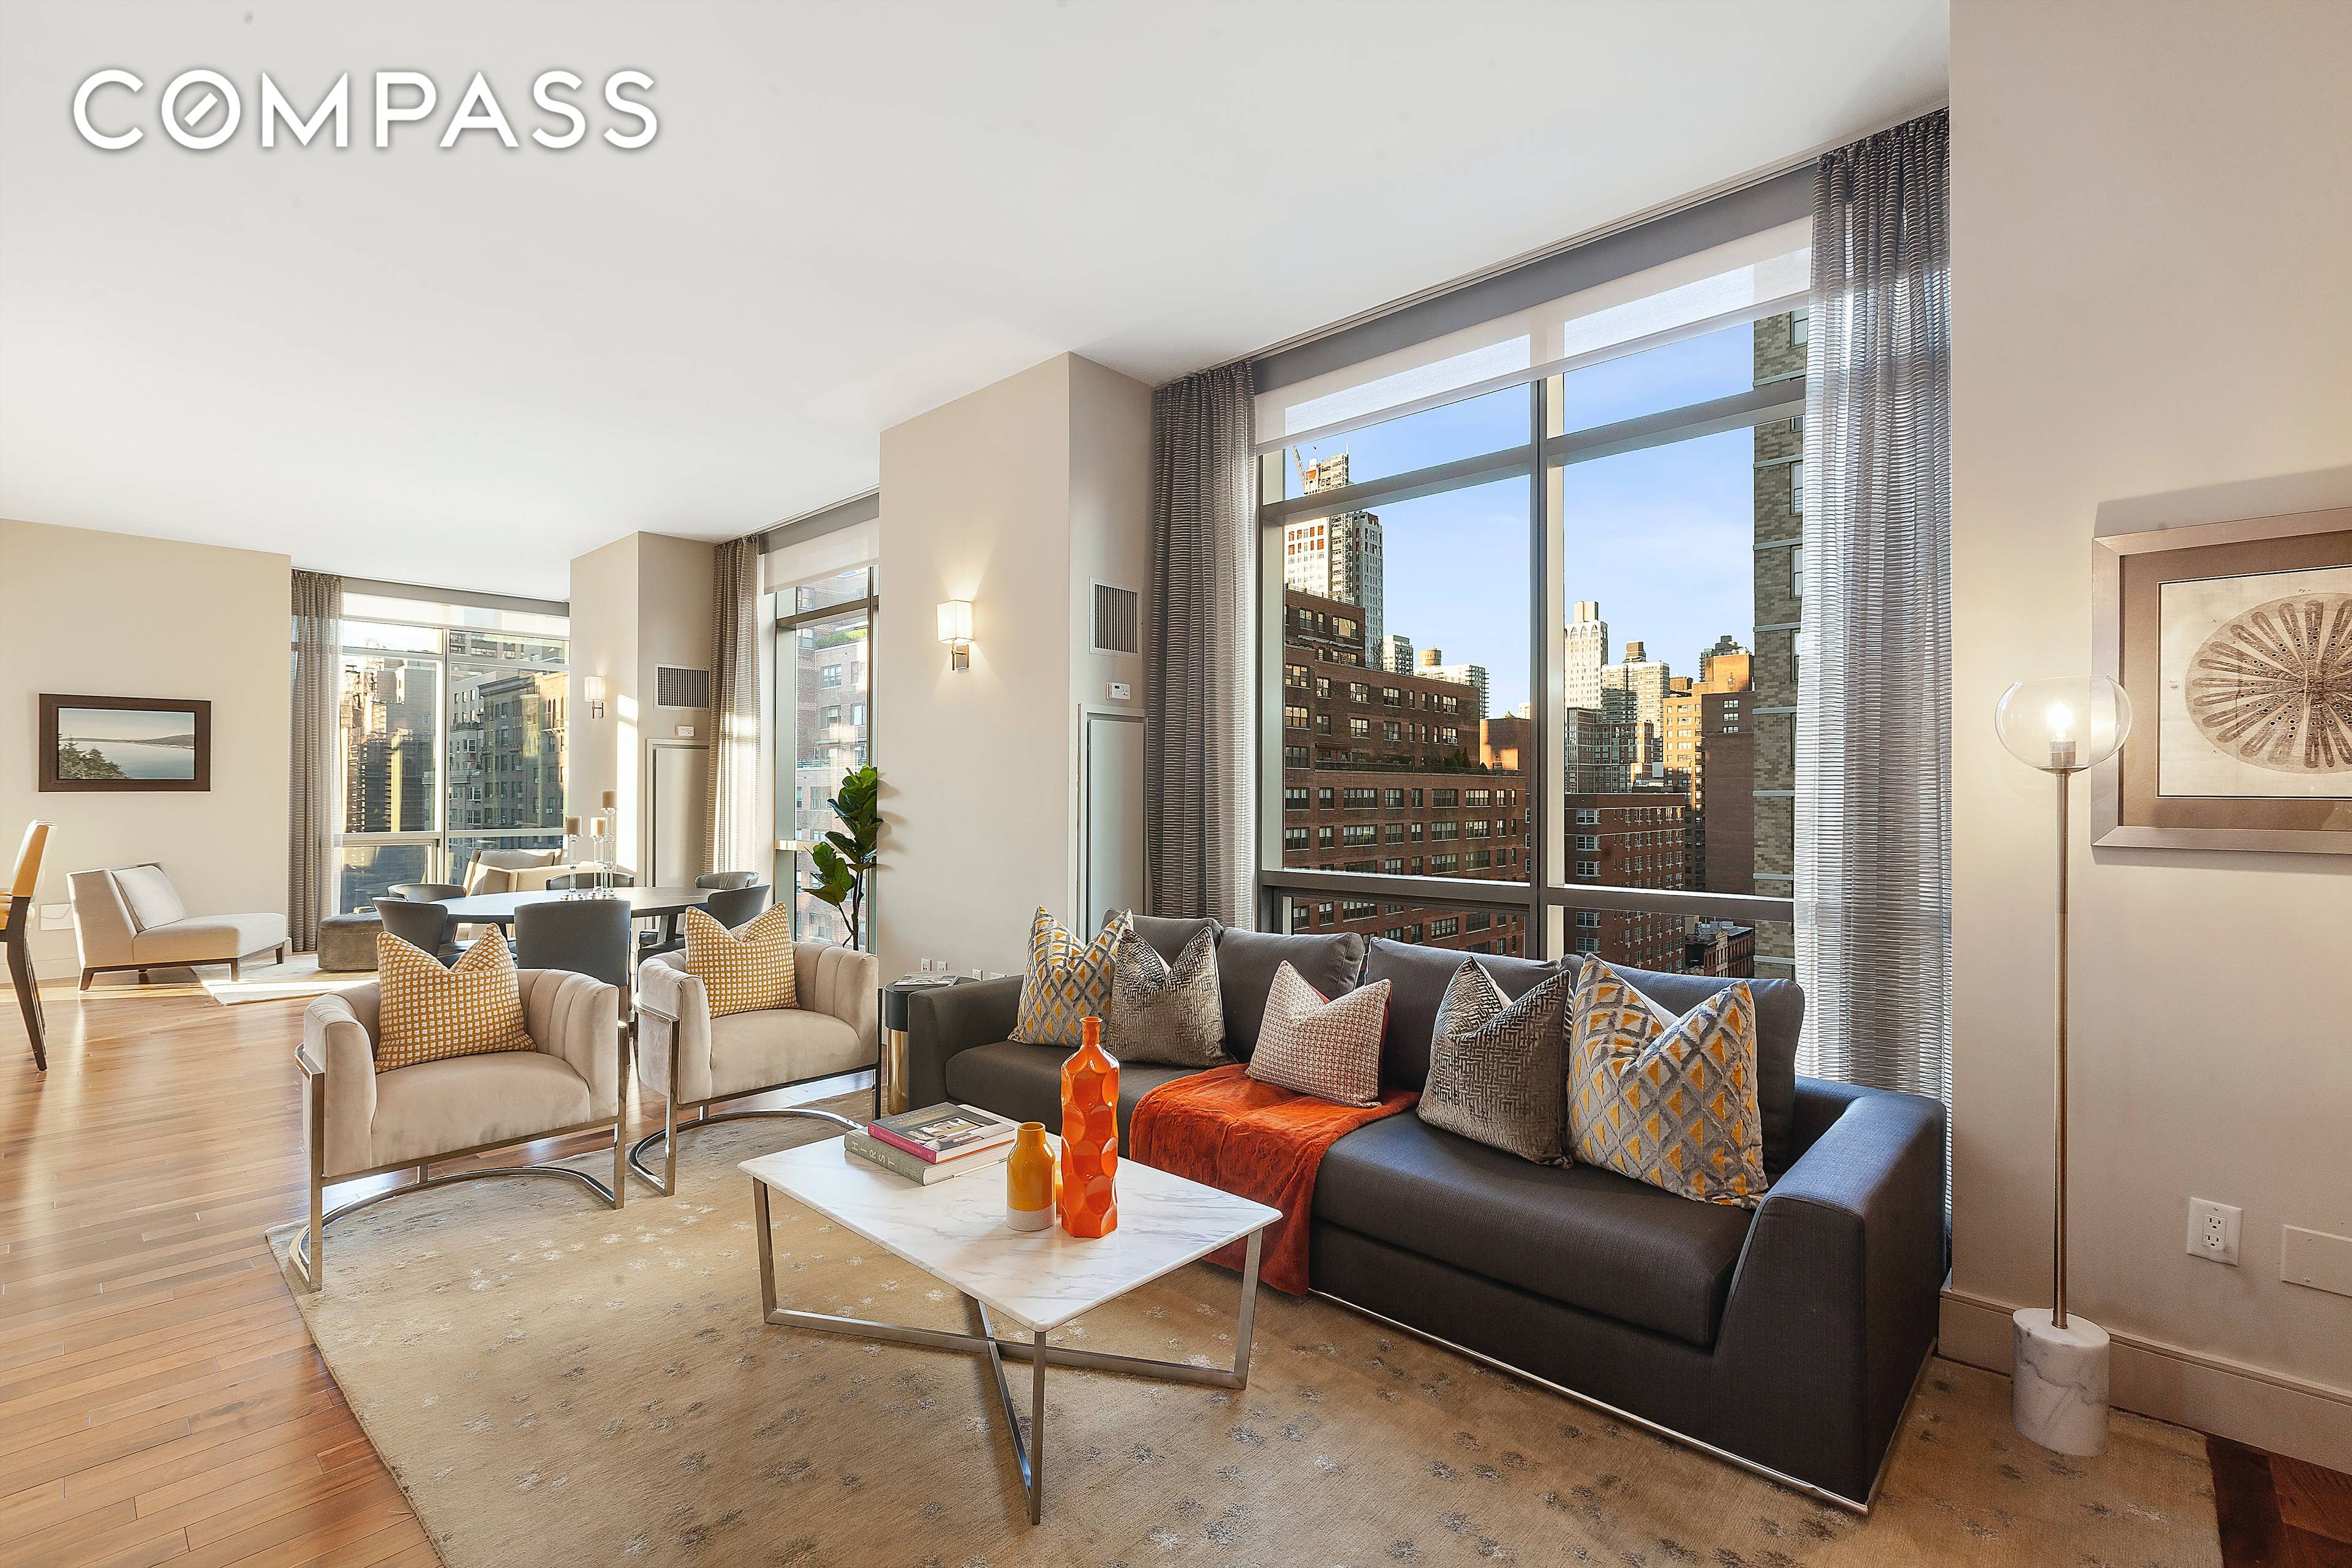 Luxurious accommodations await in this four bedroom, four and a half bathroom showplace featuring two primary suites, designer interiors and breathtaking city views in a modern, full service Lenox Hill ...